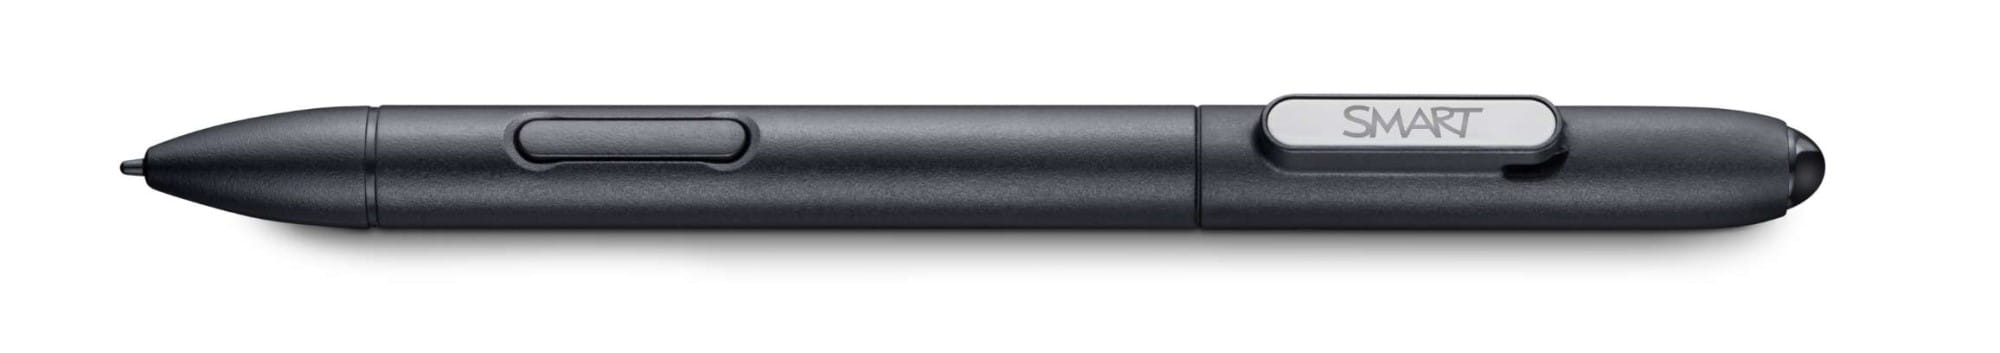 Close-up of the SMART digital ink pen used for interactive displays, highlighting the brand logo and ergonomic design for precise writing and drawing.